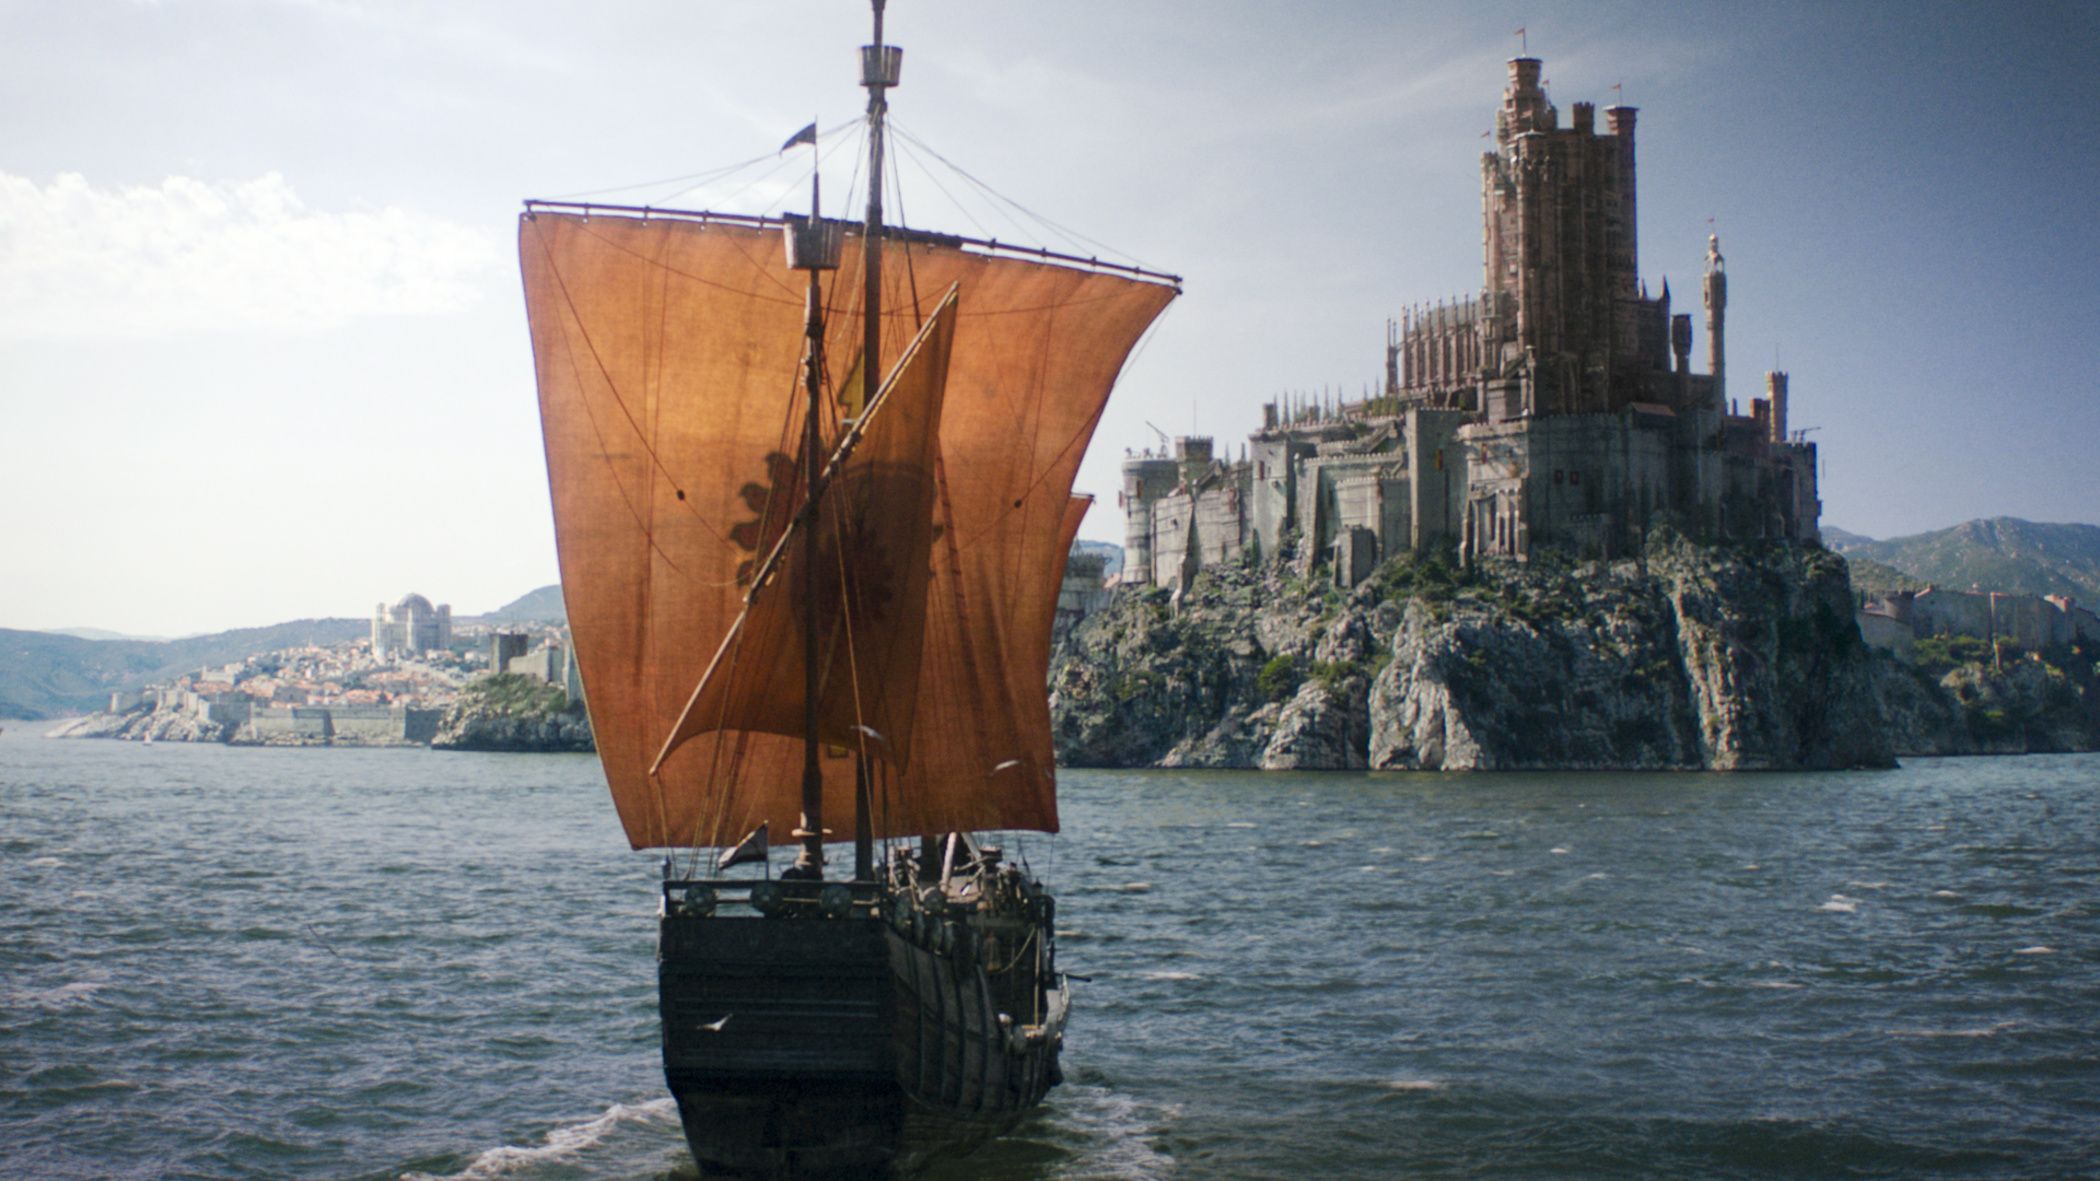 Game Of Thrones HD Wallpaper